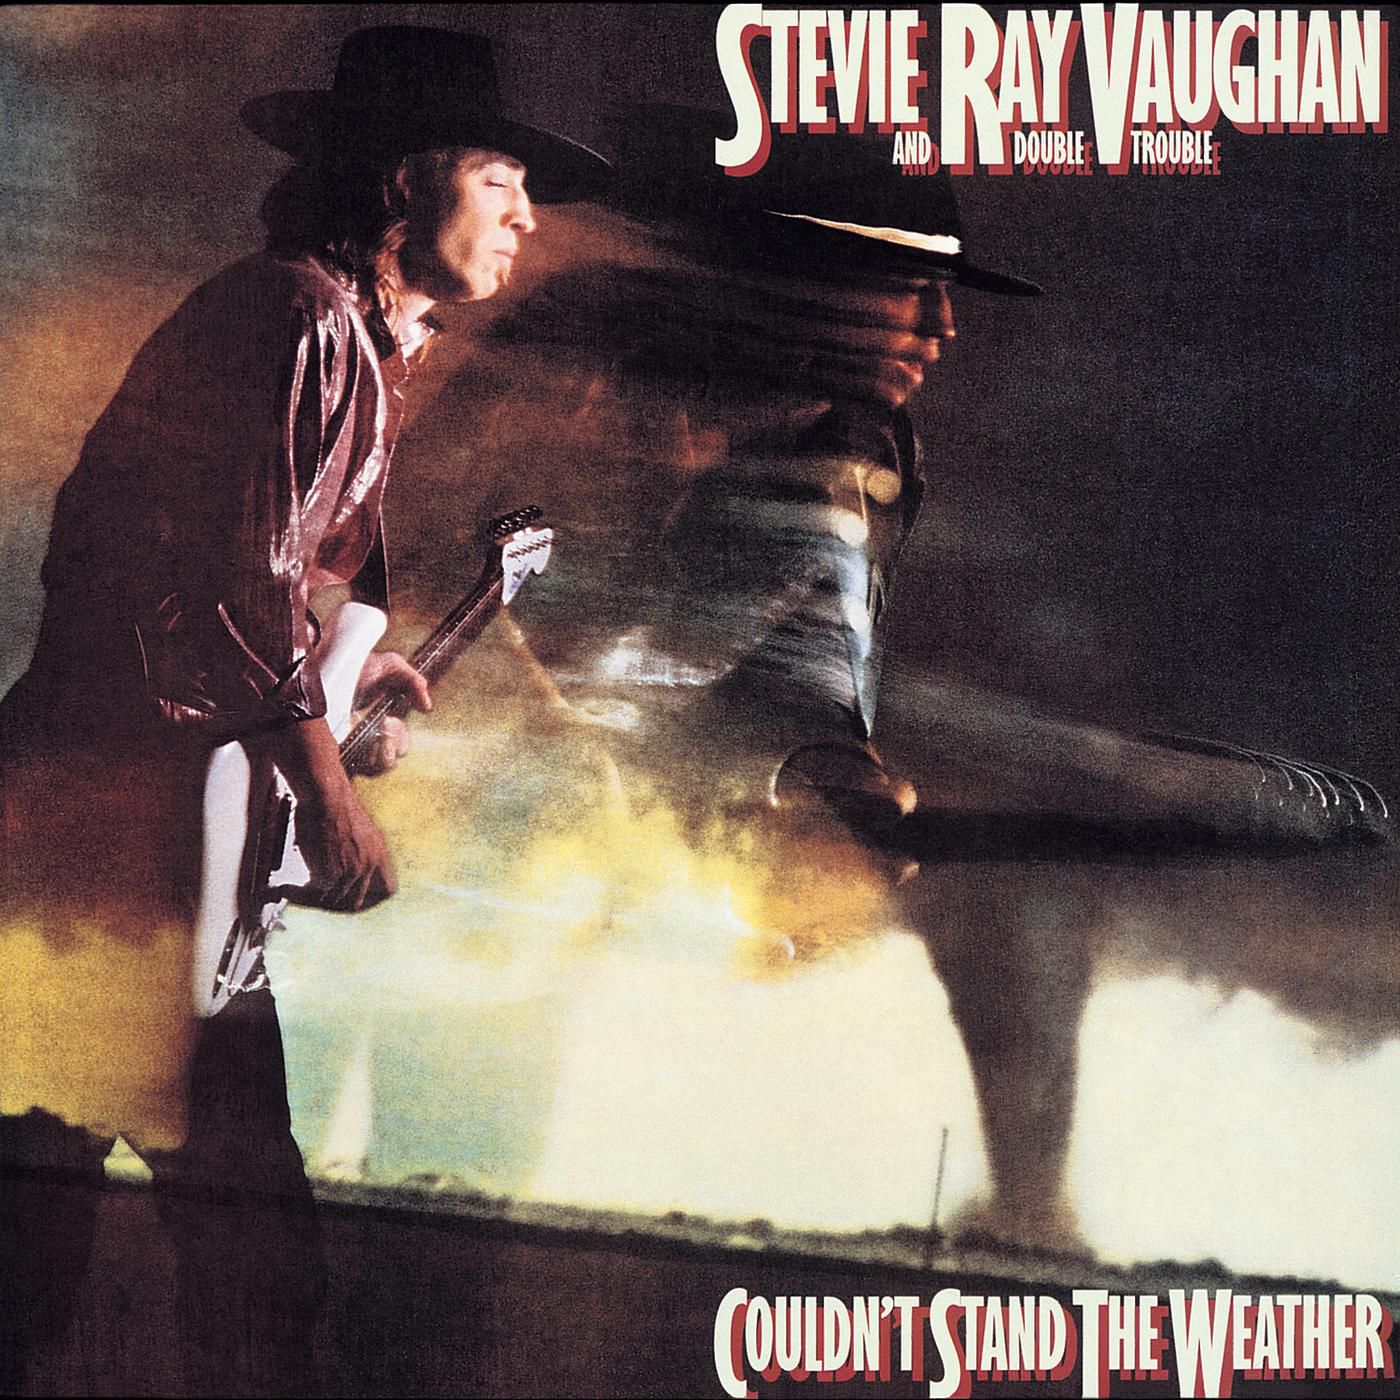 Stevie Ray Vaughan – Couldn’t Stand The Weather